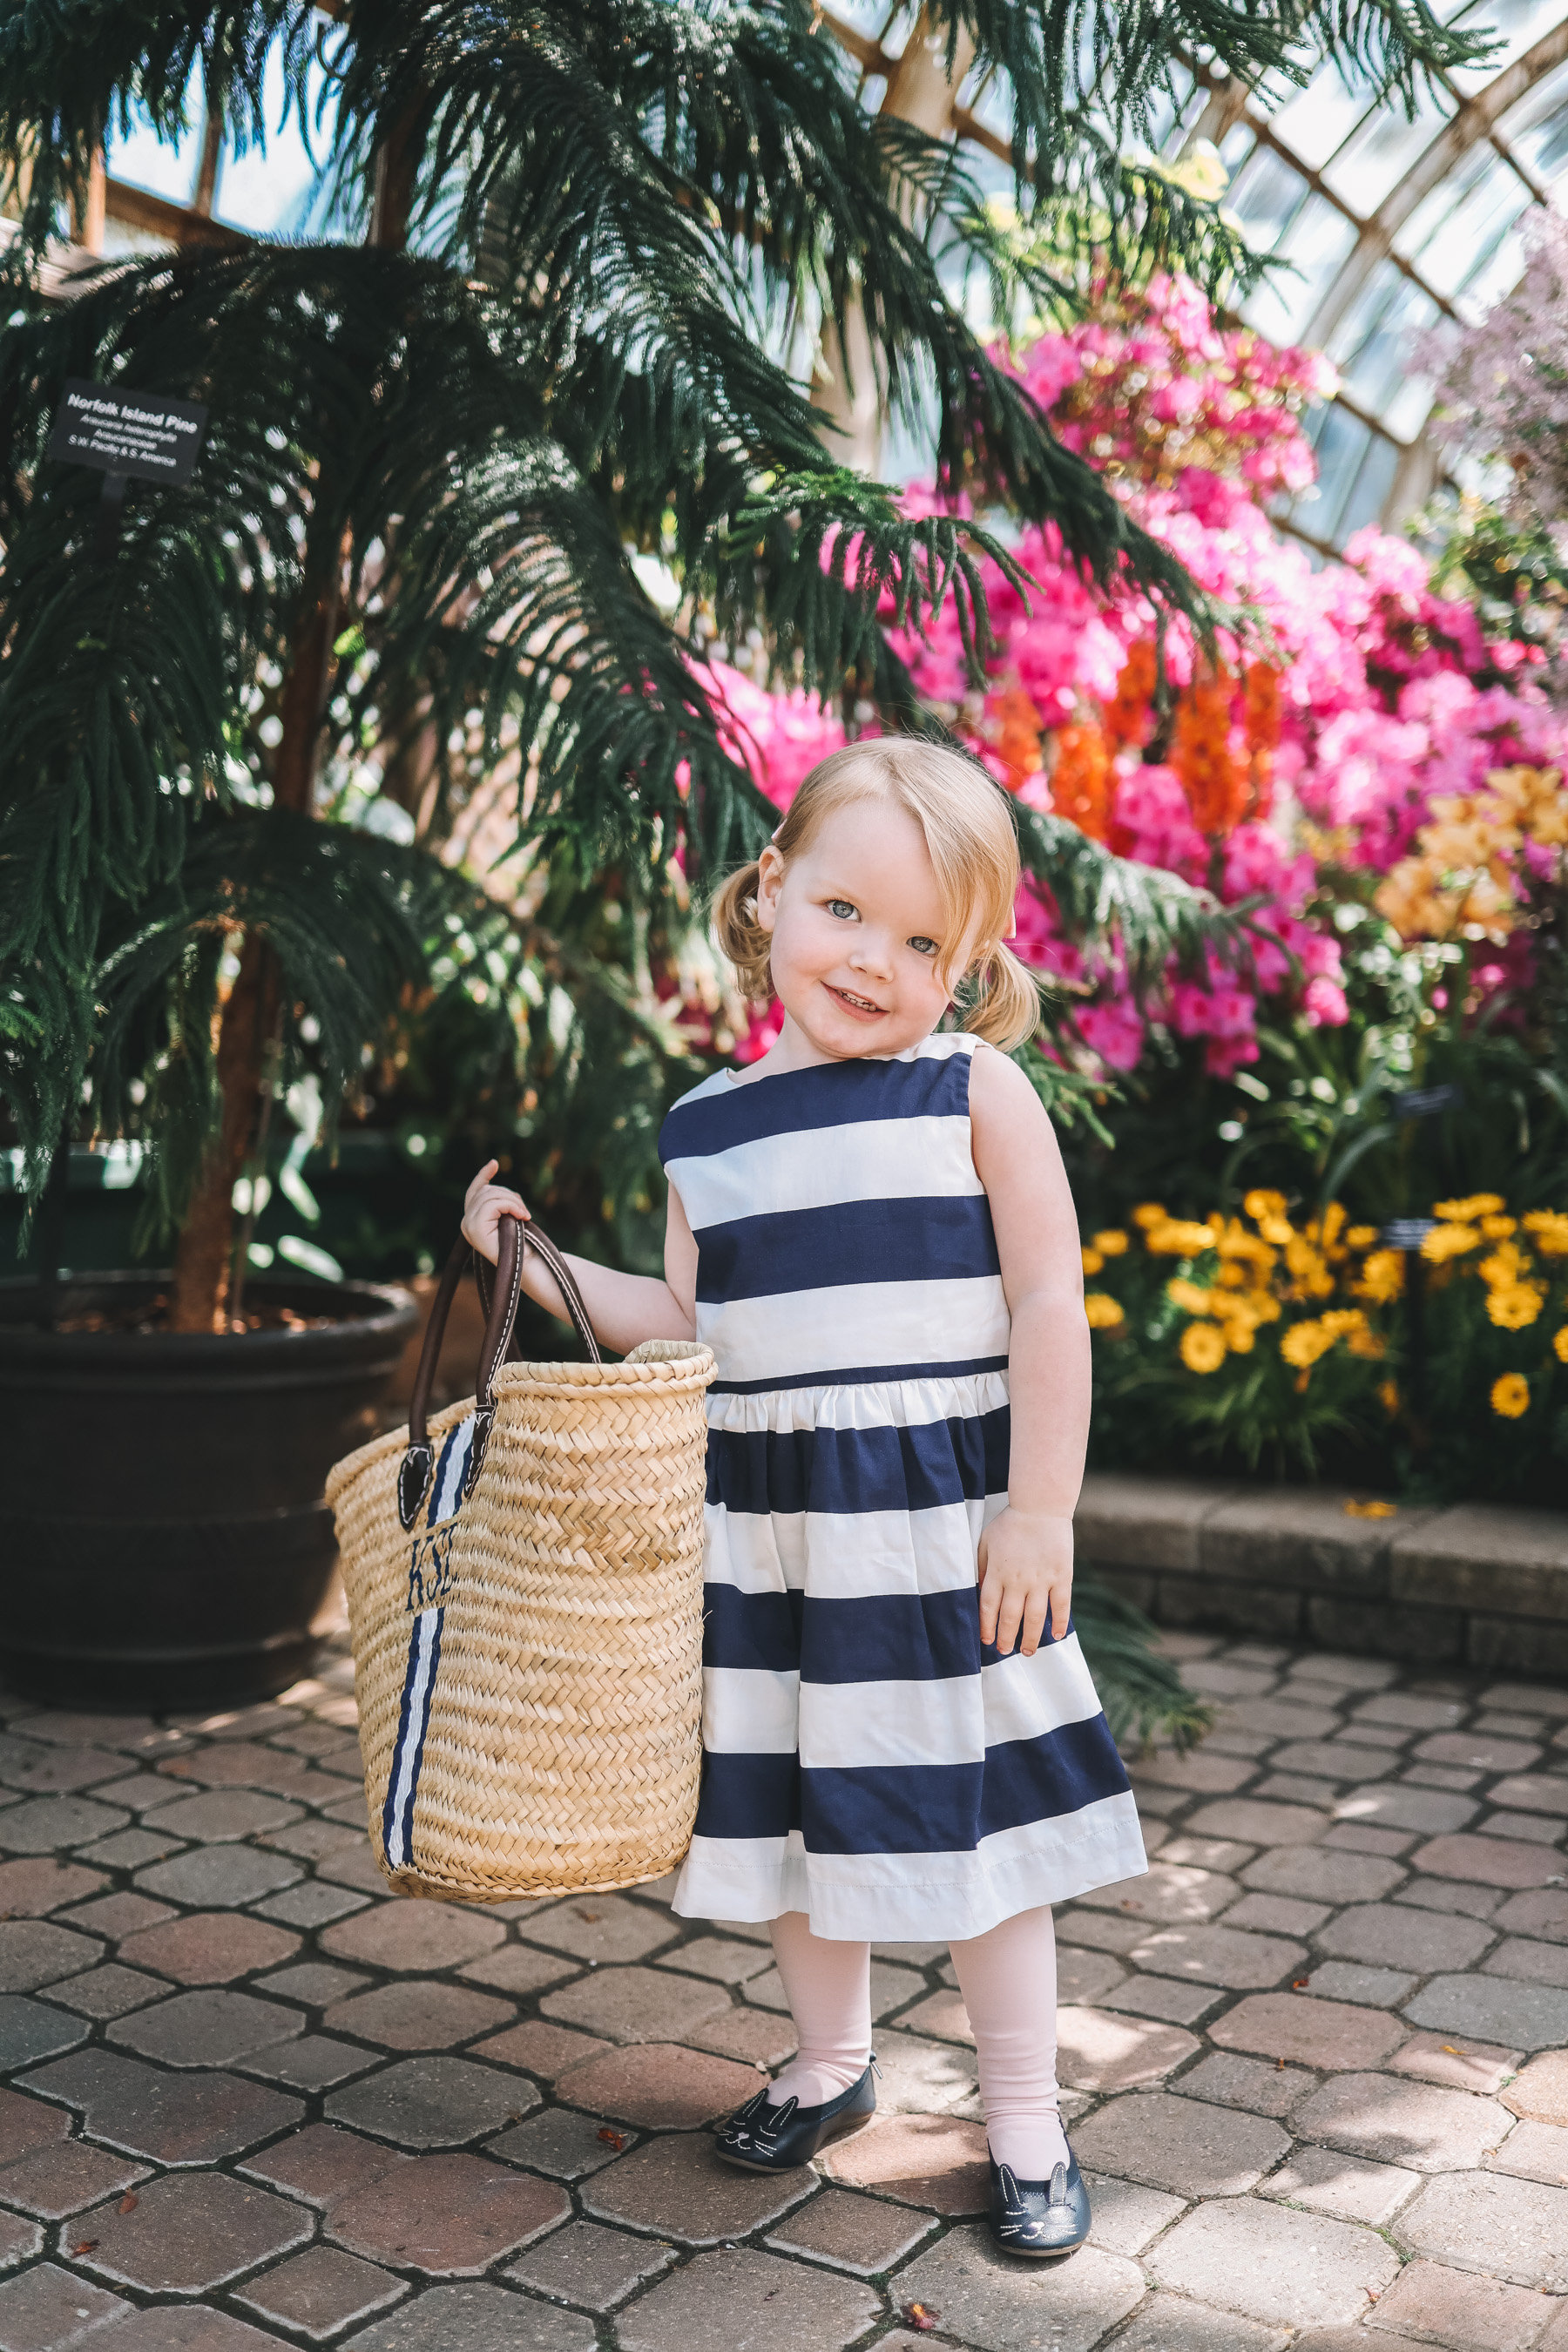 Emma's outfit: J.Crew Factory Navy Striped Dress / Mark & Graham Hand-Painted Straw Tote c/o / Newer Gap Bunny Flats